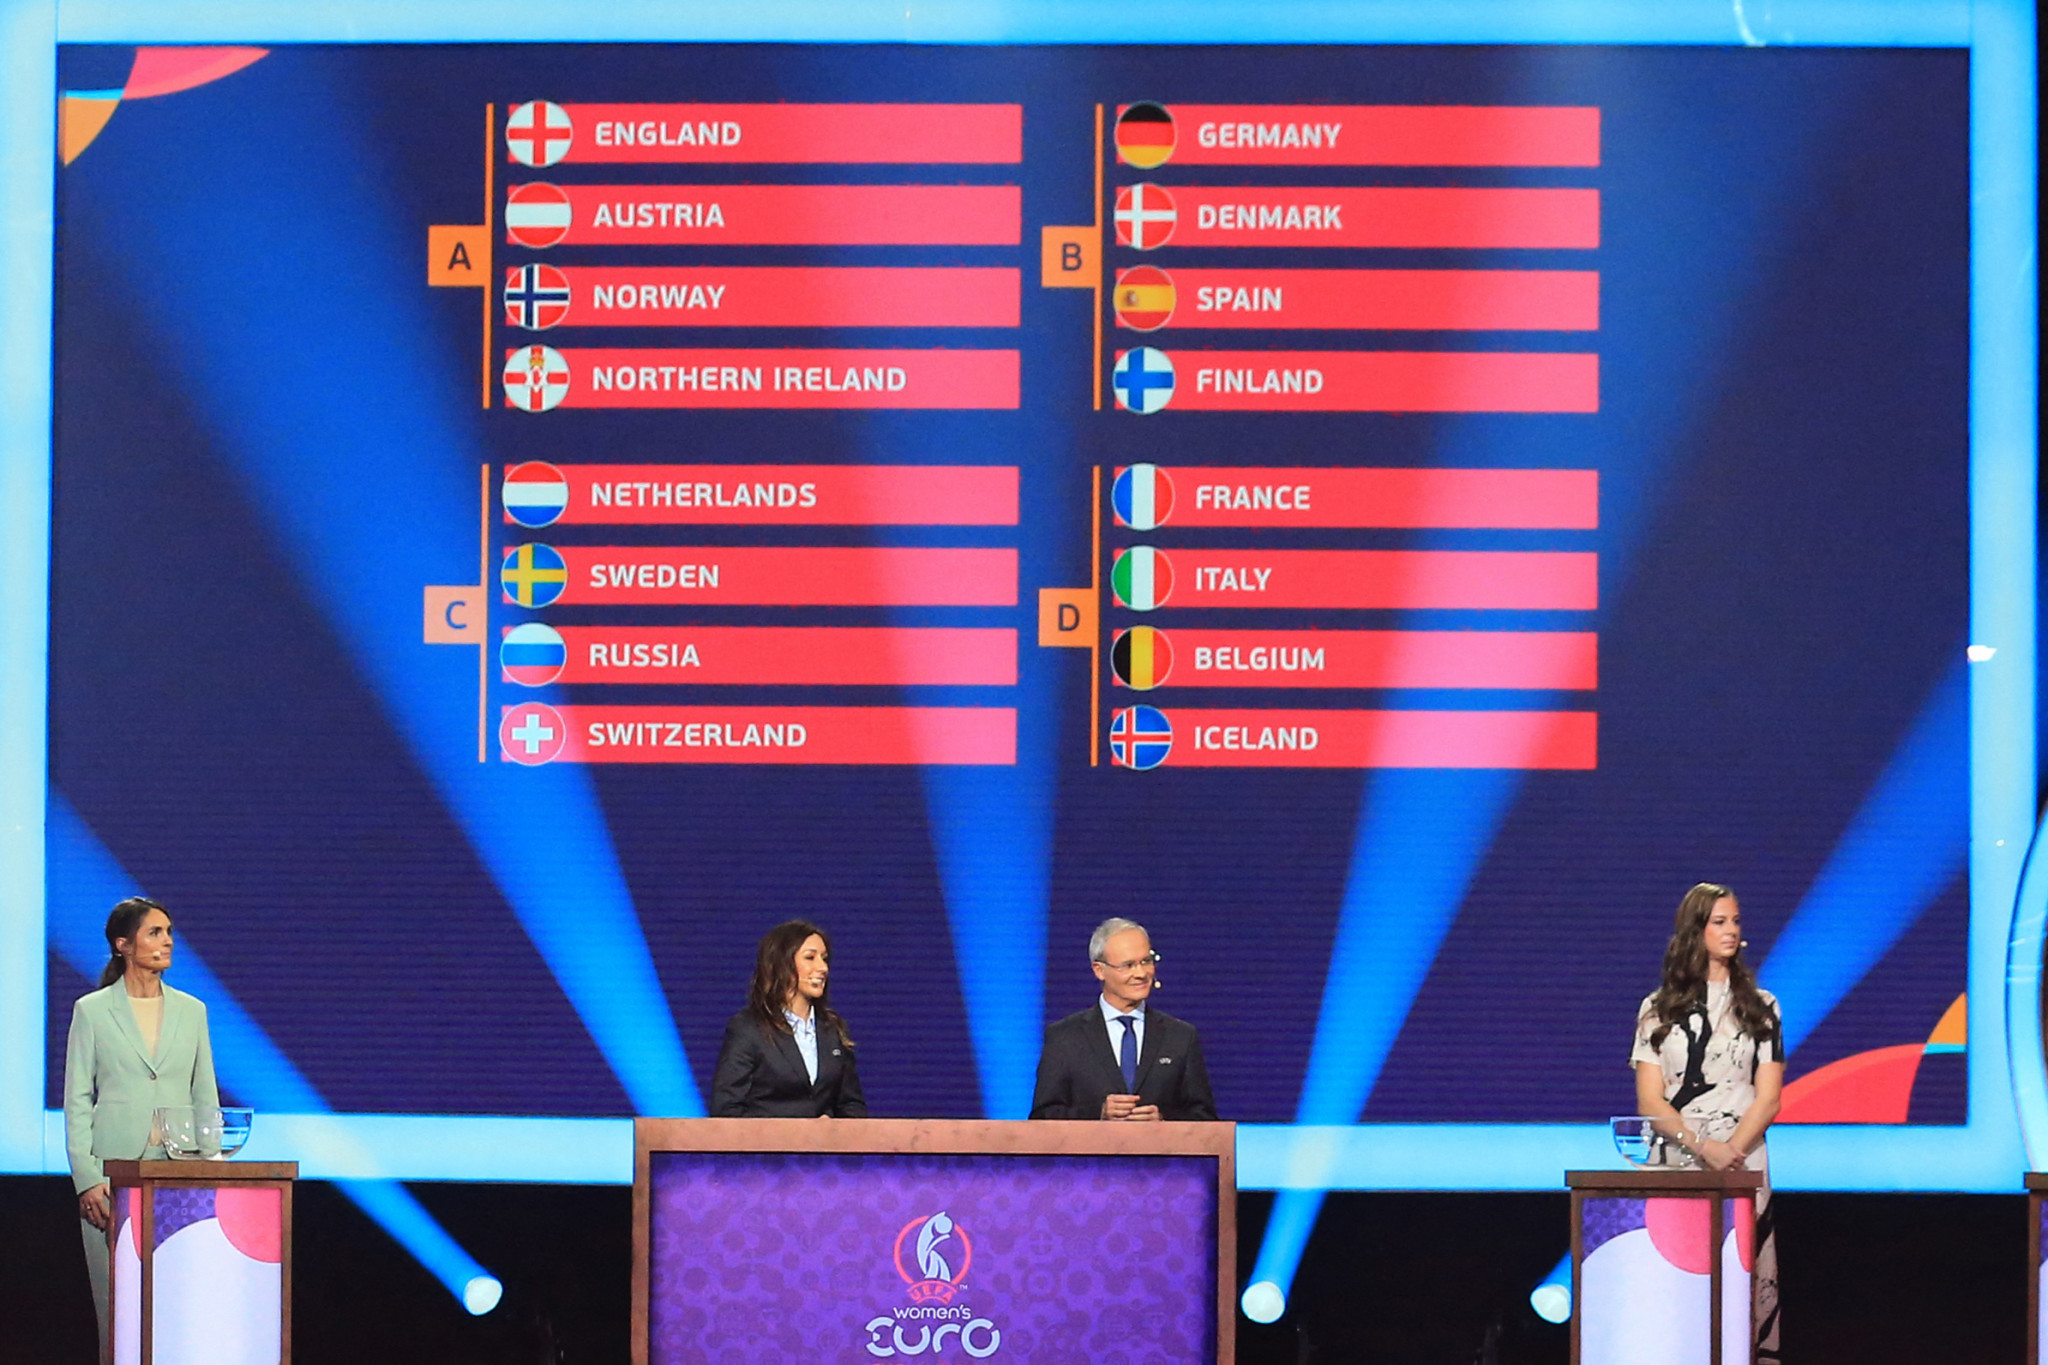 Russia has qualified for the Women's Euro 2022, but is prohibited from competing in the tournament in England under FIFA and UEFA's ruling ©Getty Images